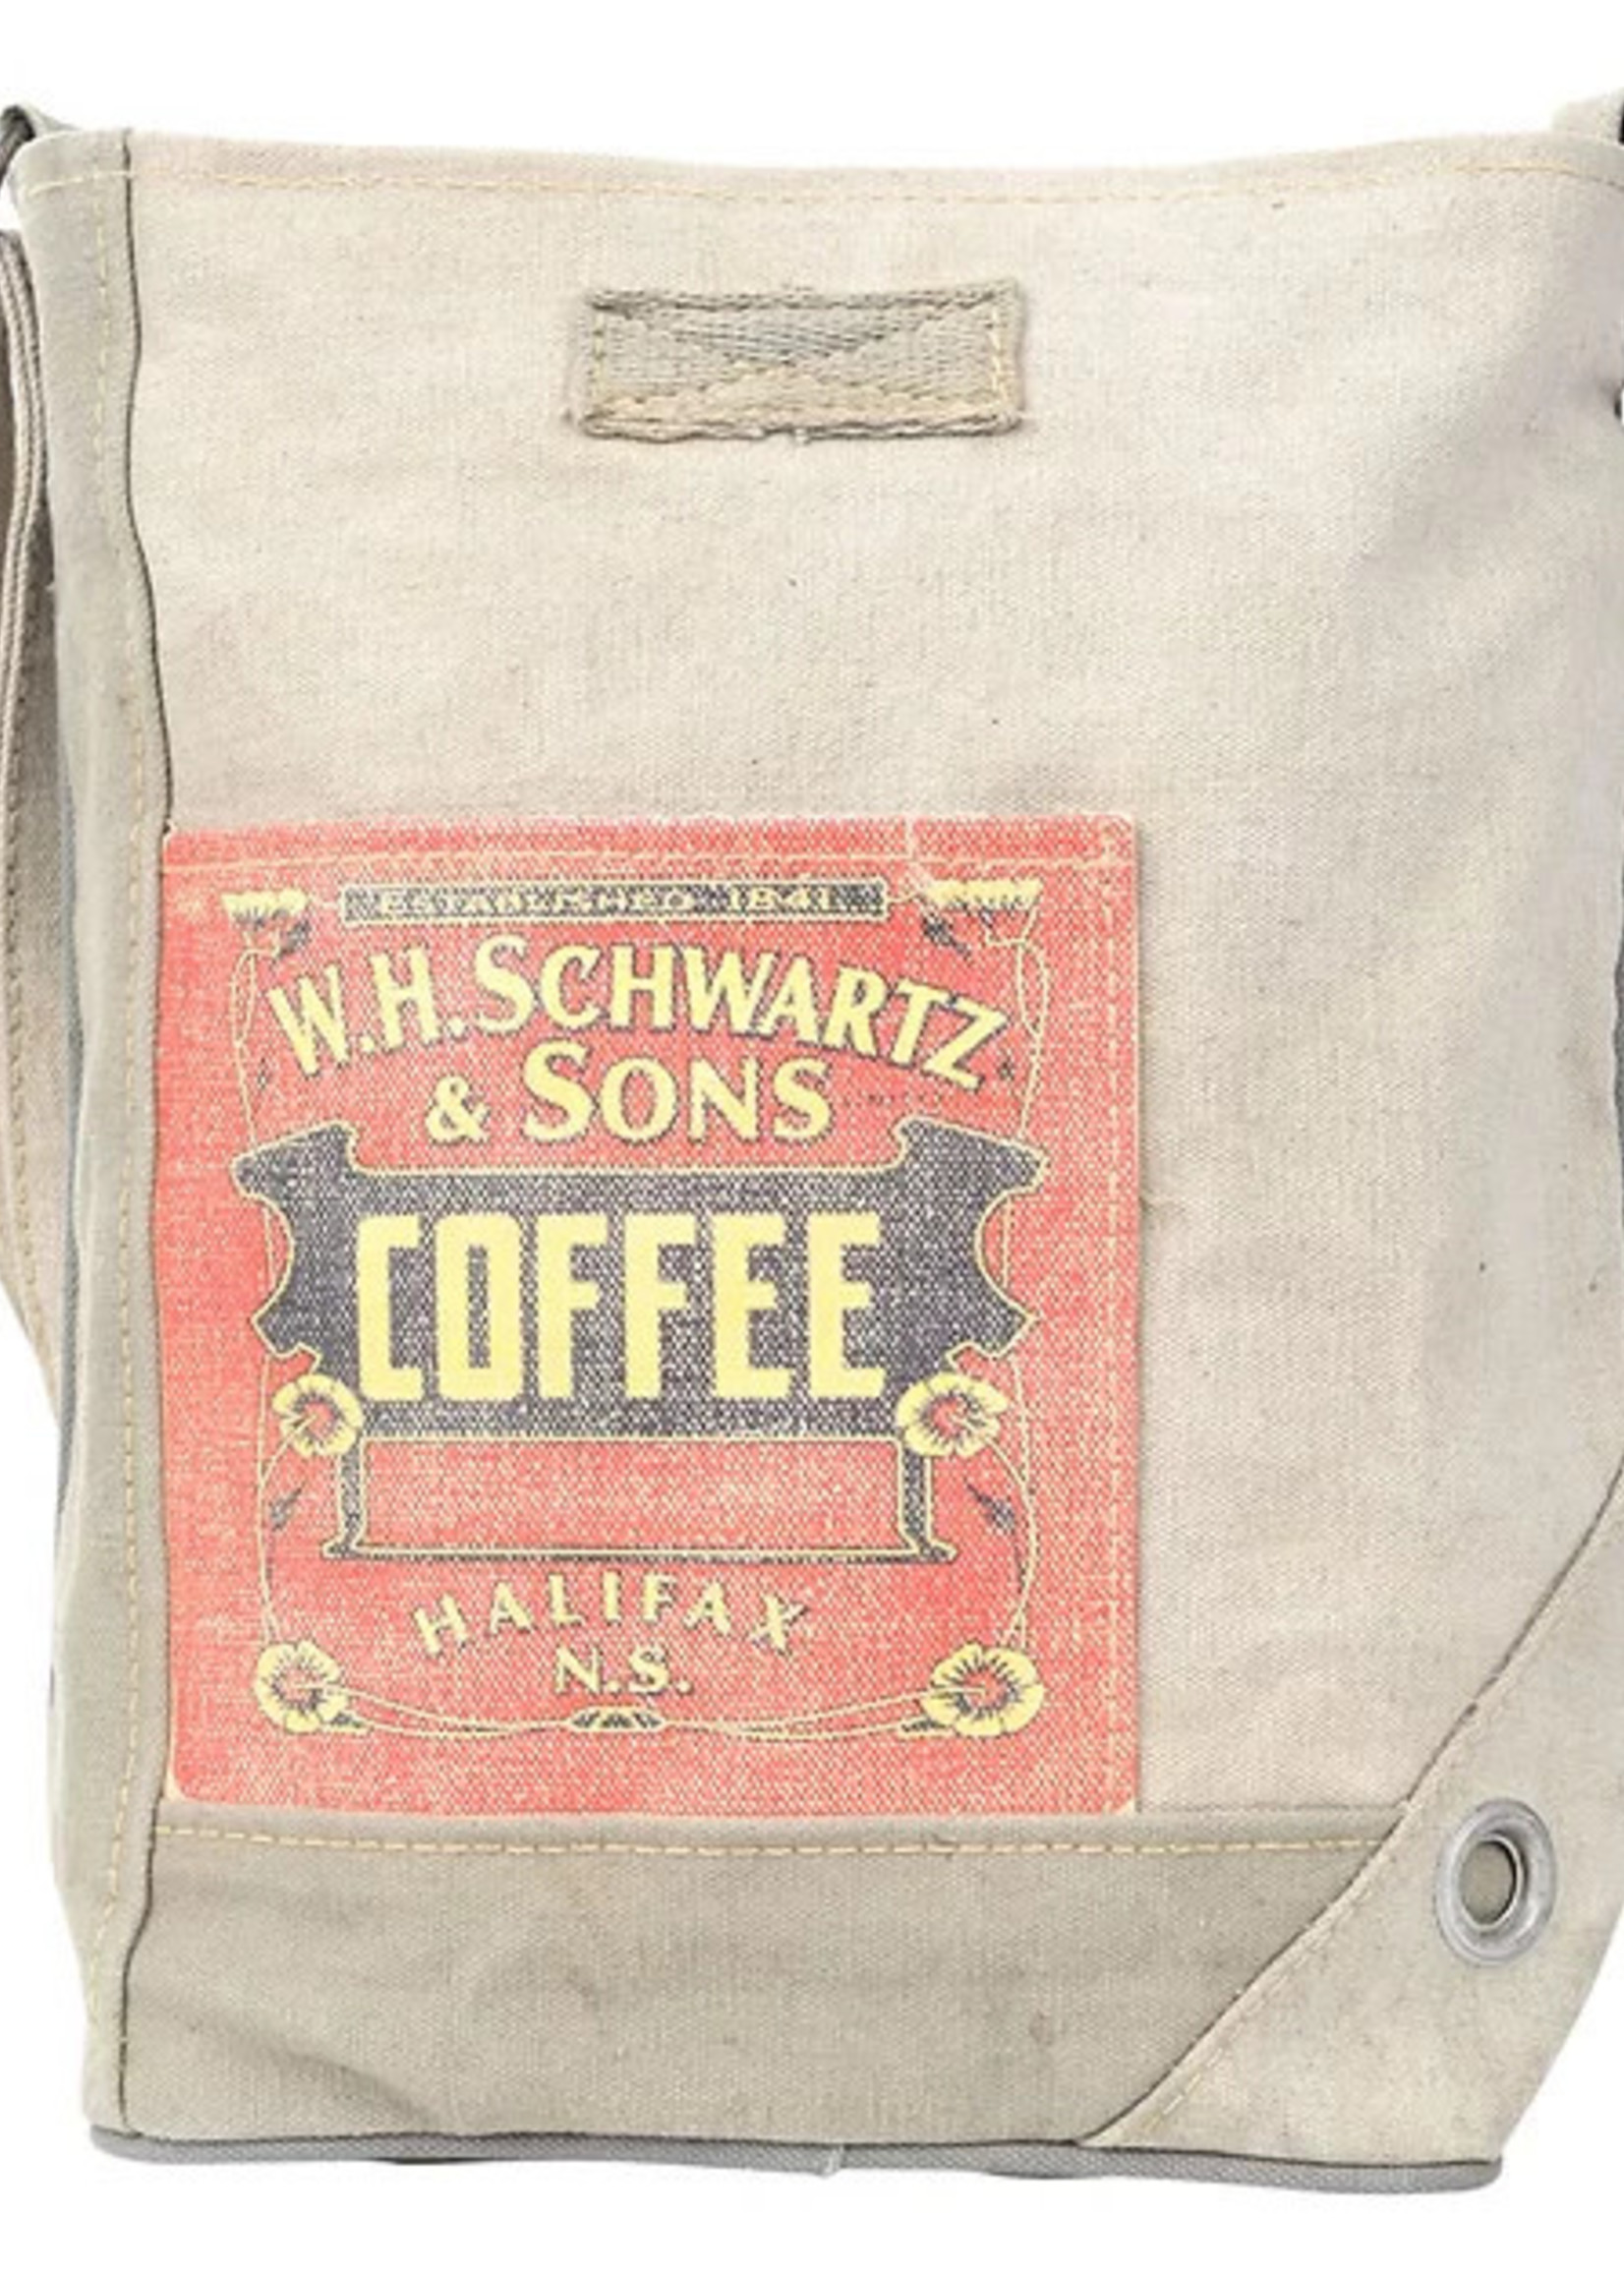 COFFEE PRINT CANVAS CROSSBODY BAG WITH FRONT AND BACK POCKET